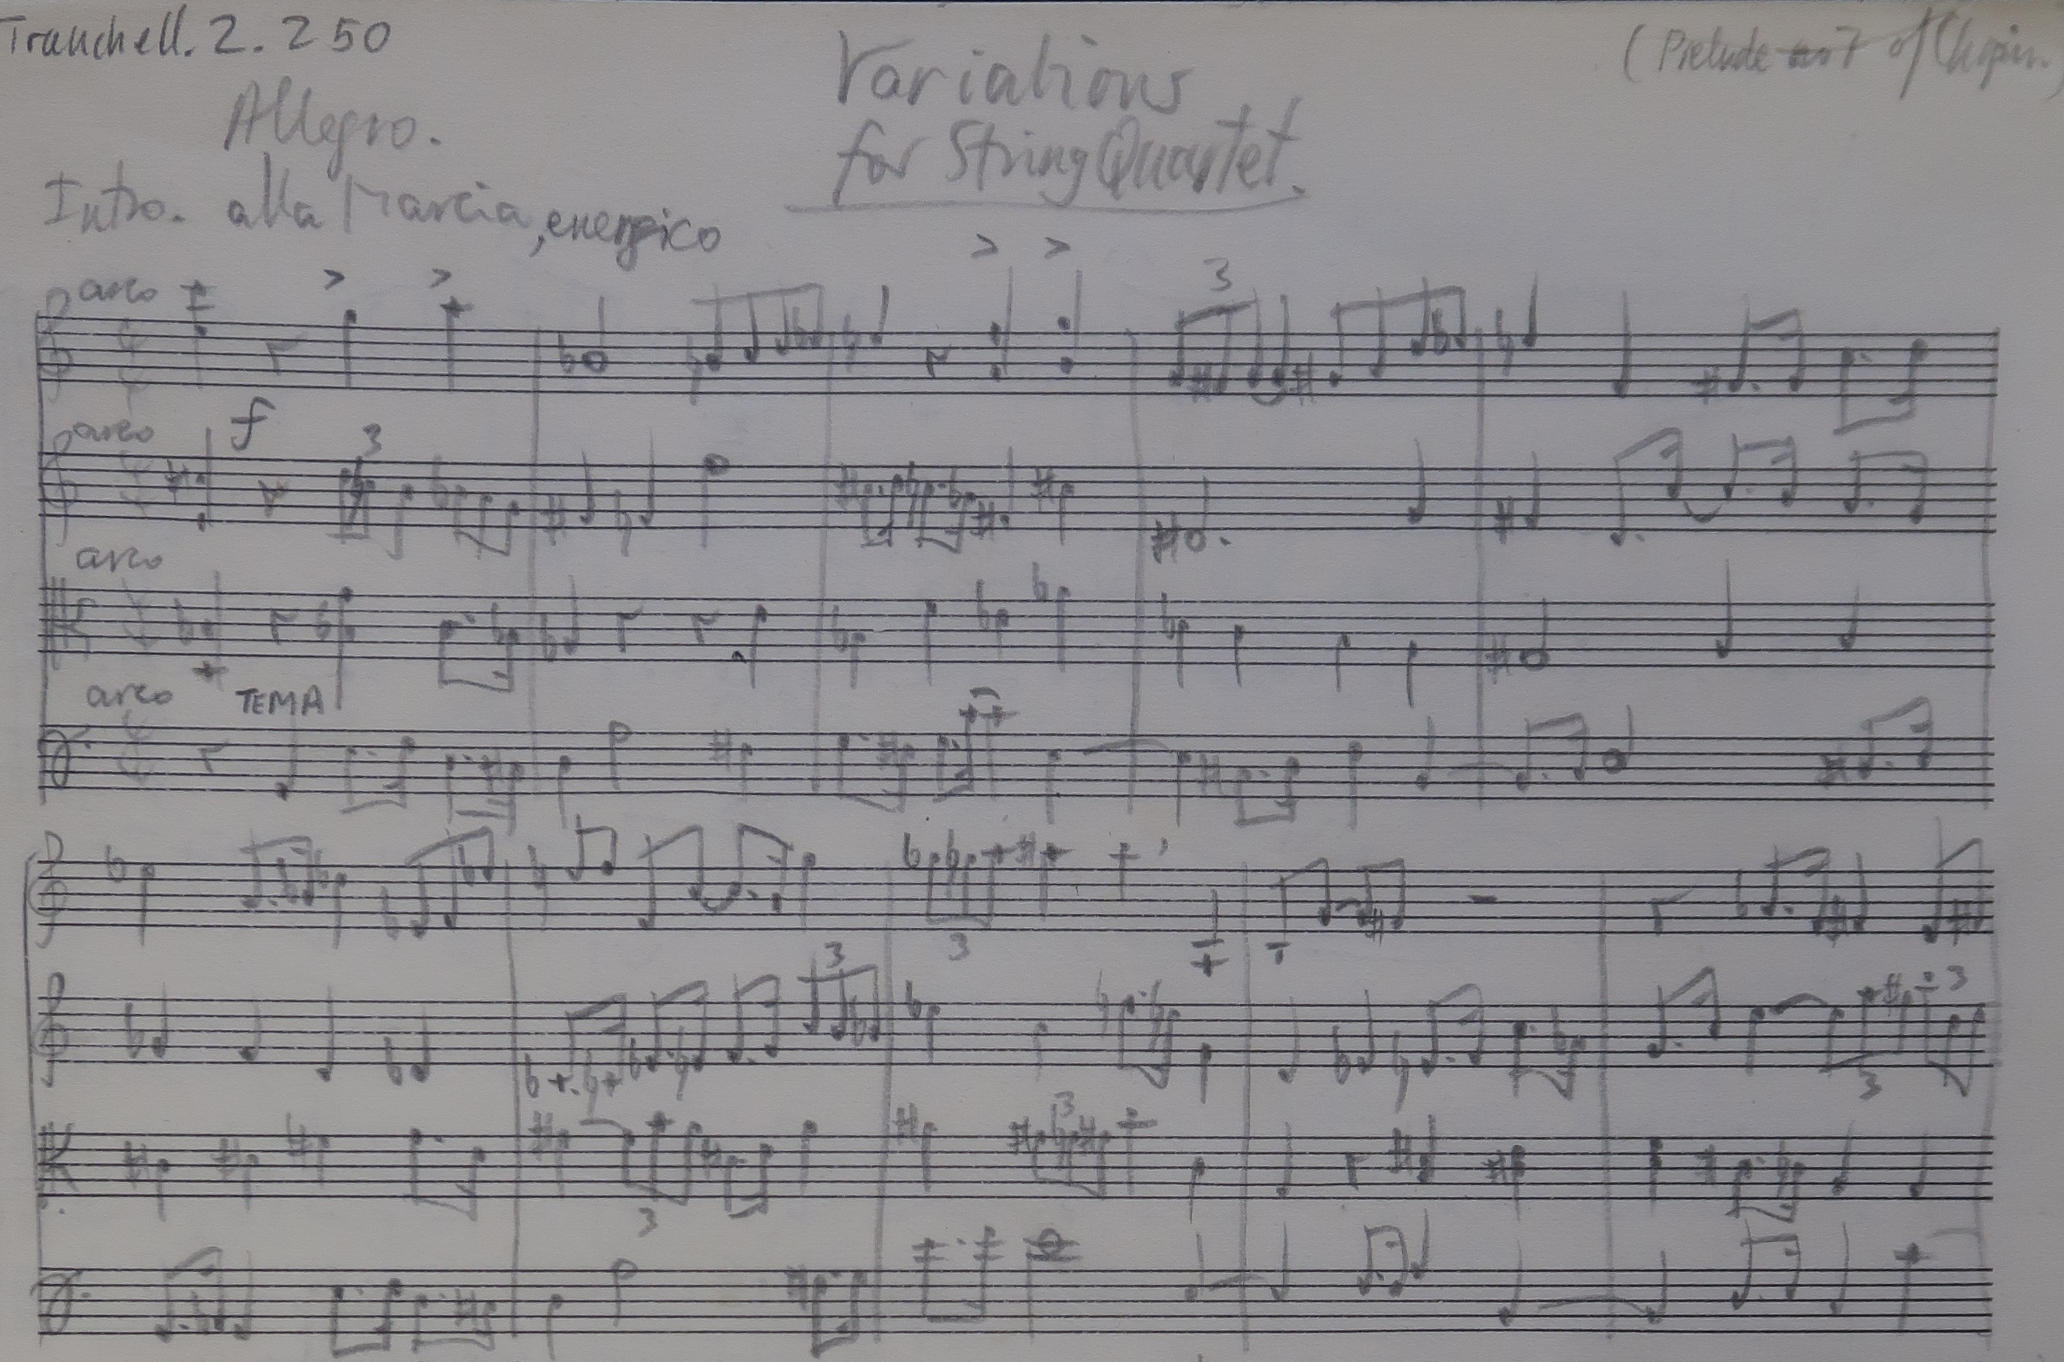 Image of the beginning of Peter Tranchell's Variations for String Quartet manuscript score (1949)